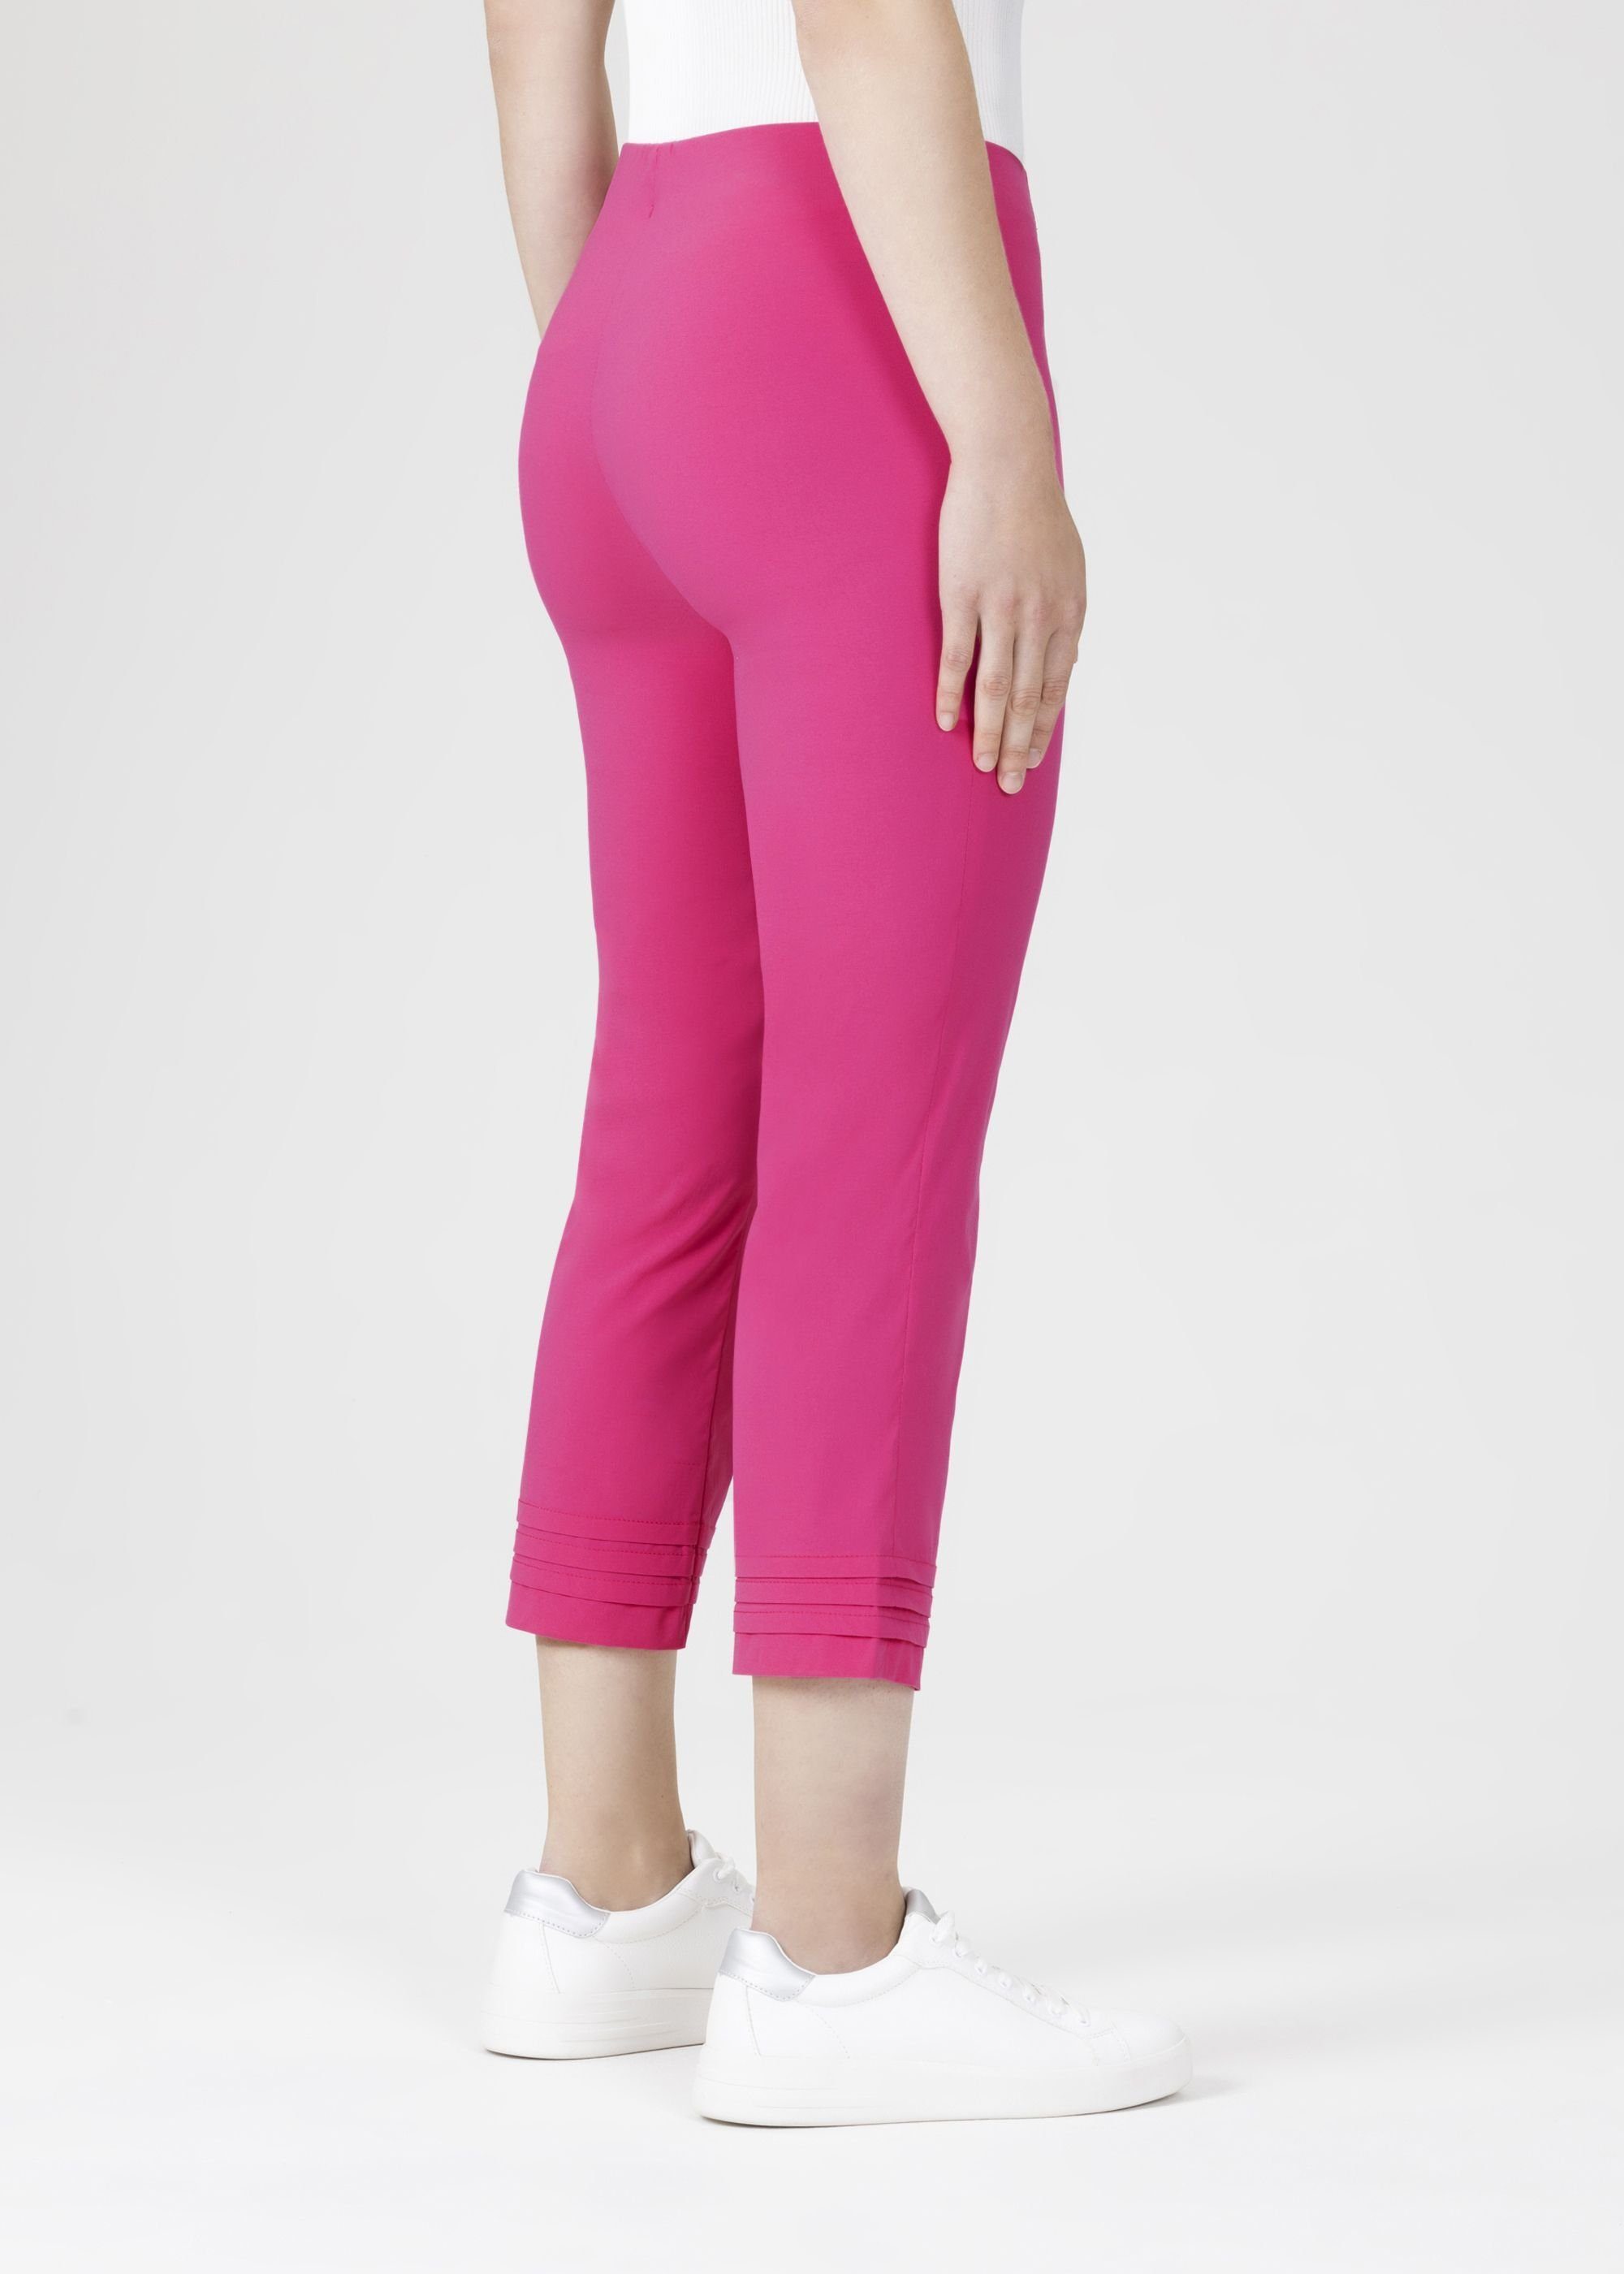 fluo Stoffhose Stehmann fuxia Ina mit Faltendetails